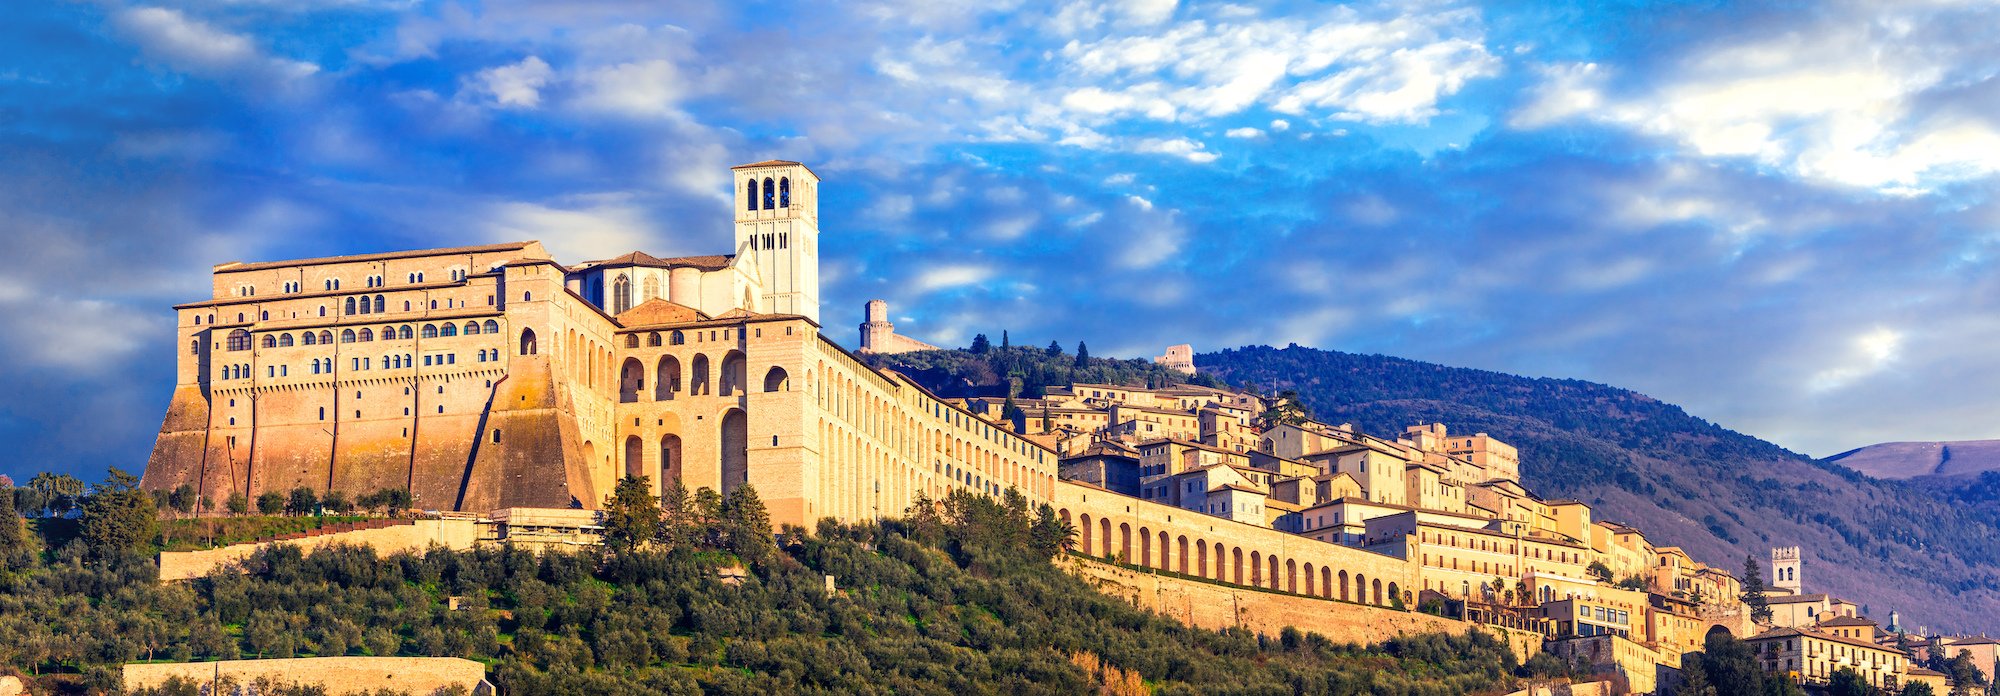 Assisi Travel